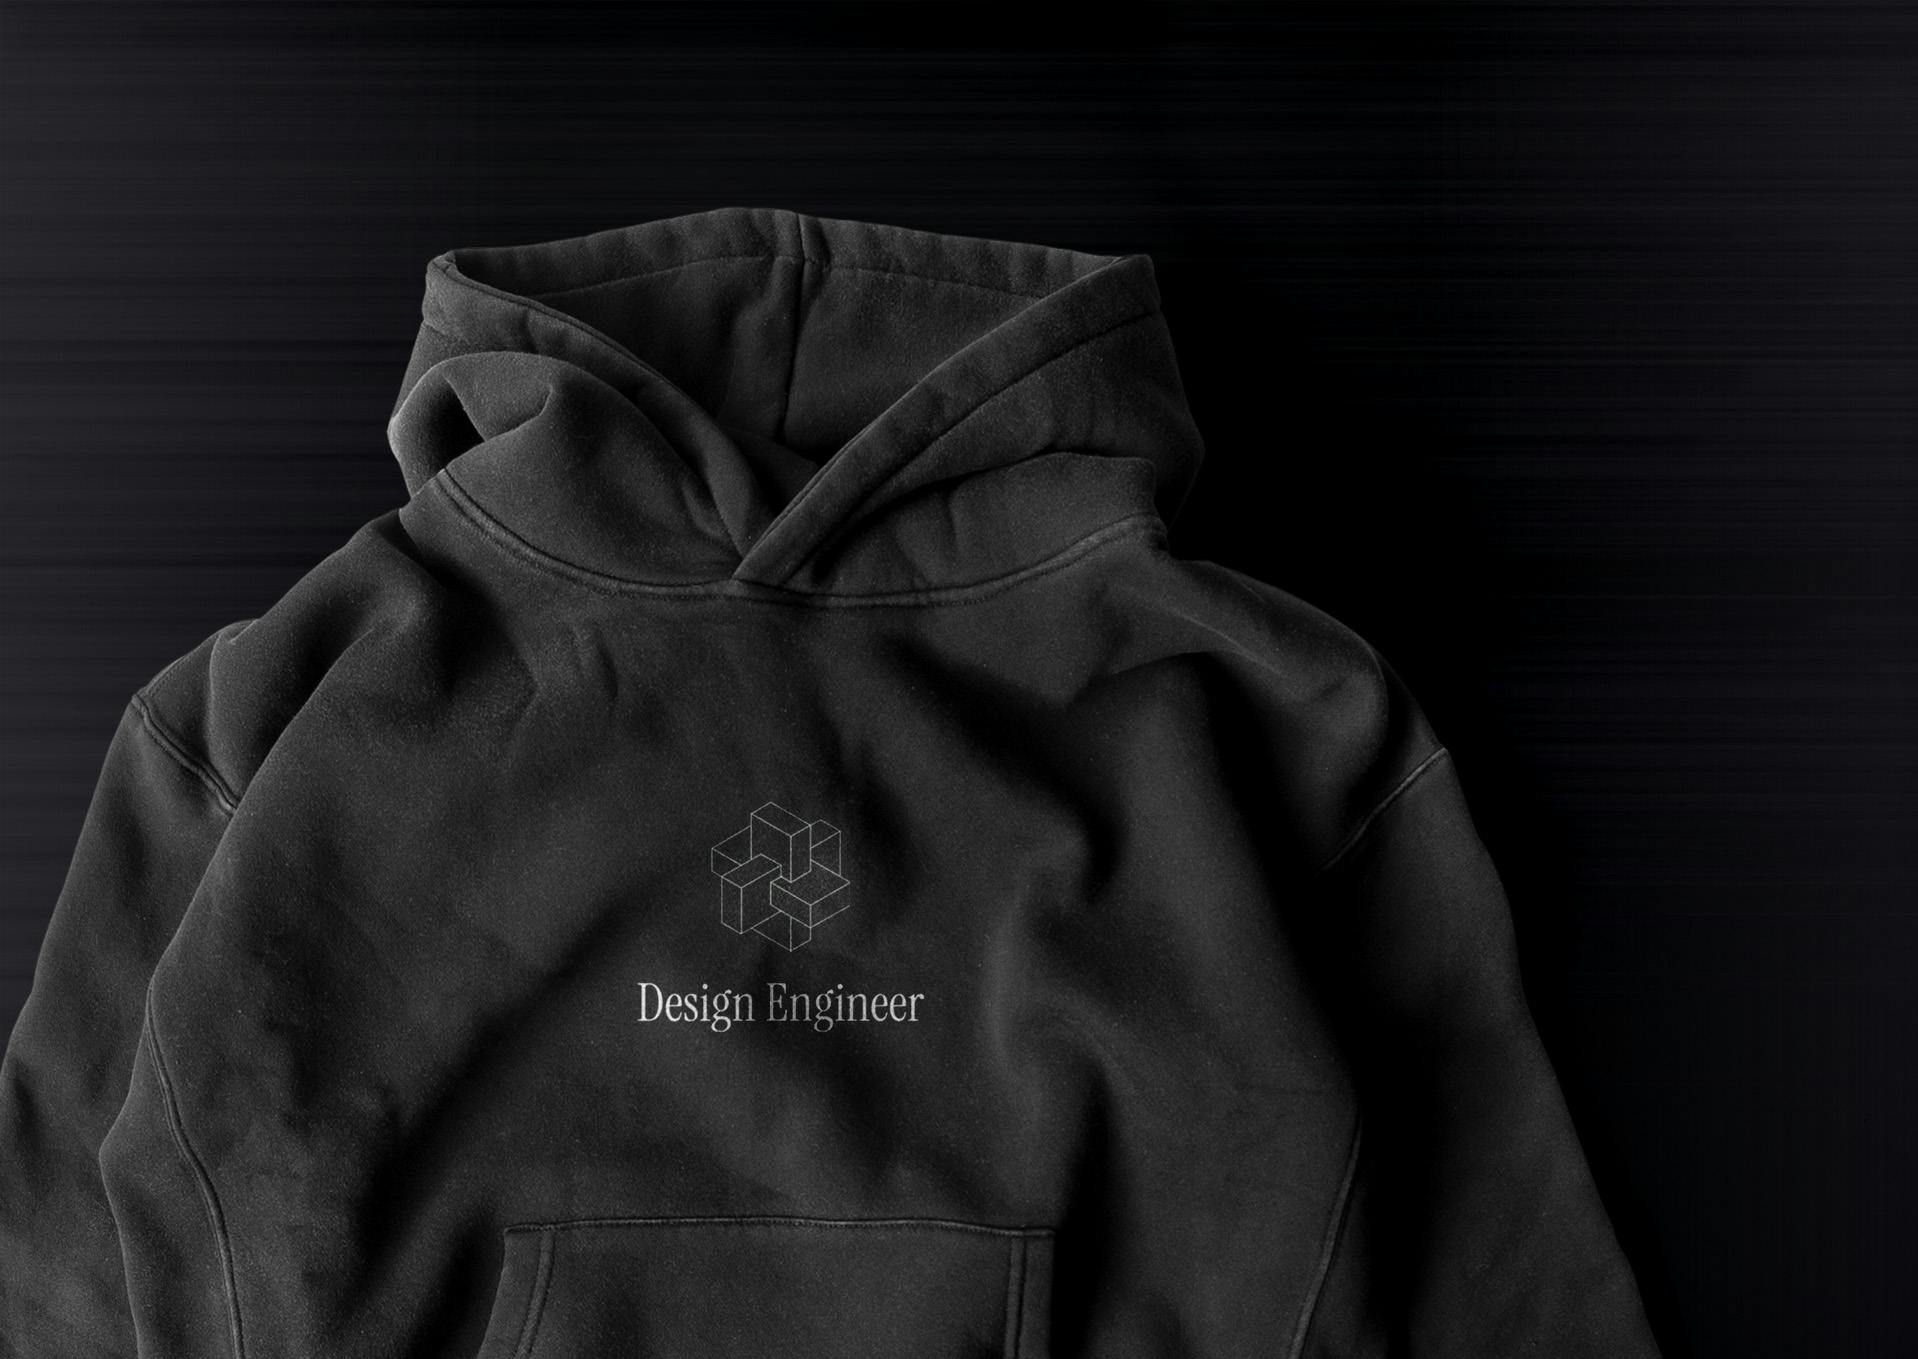 Hoodie with 'design Engineer' printed on the chest